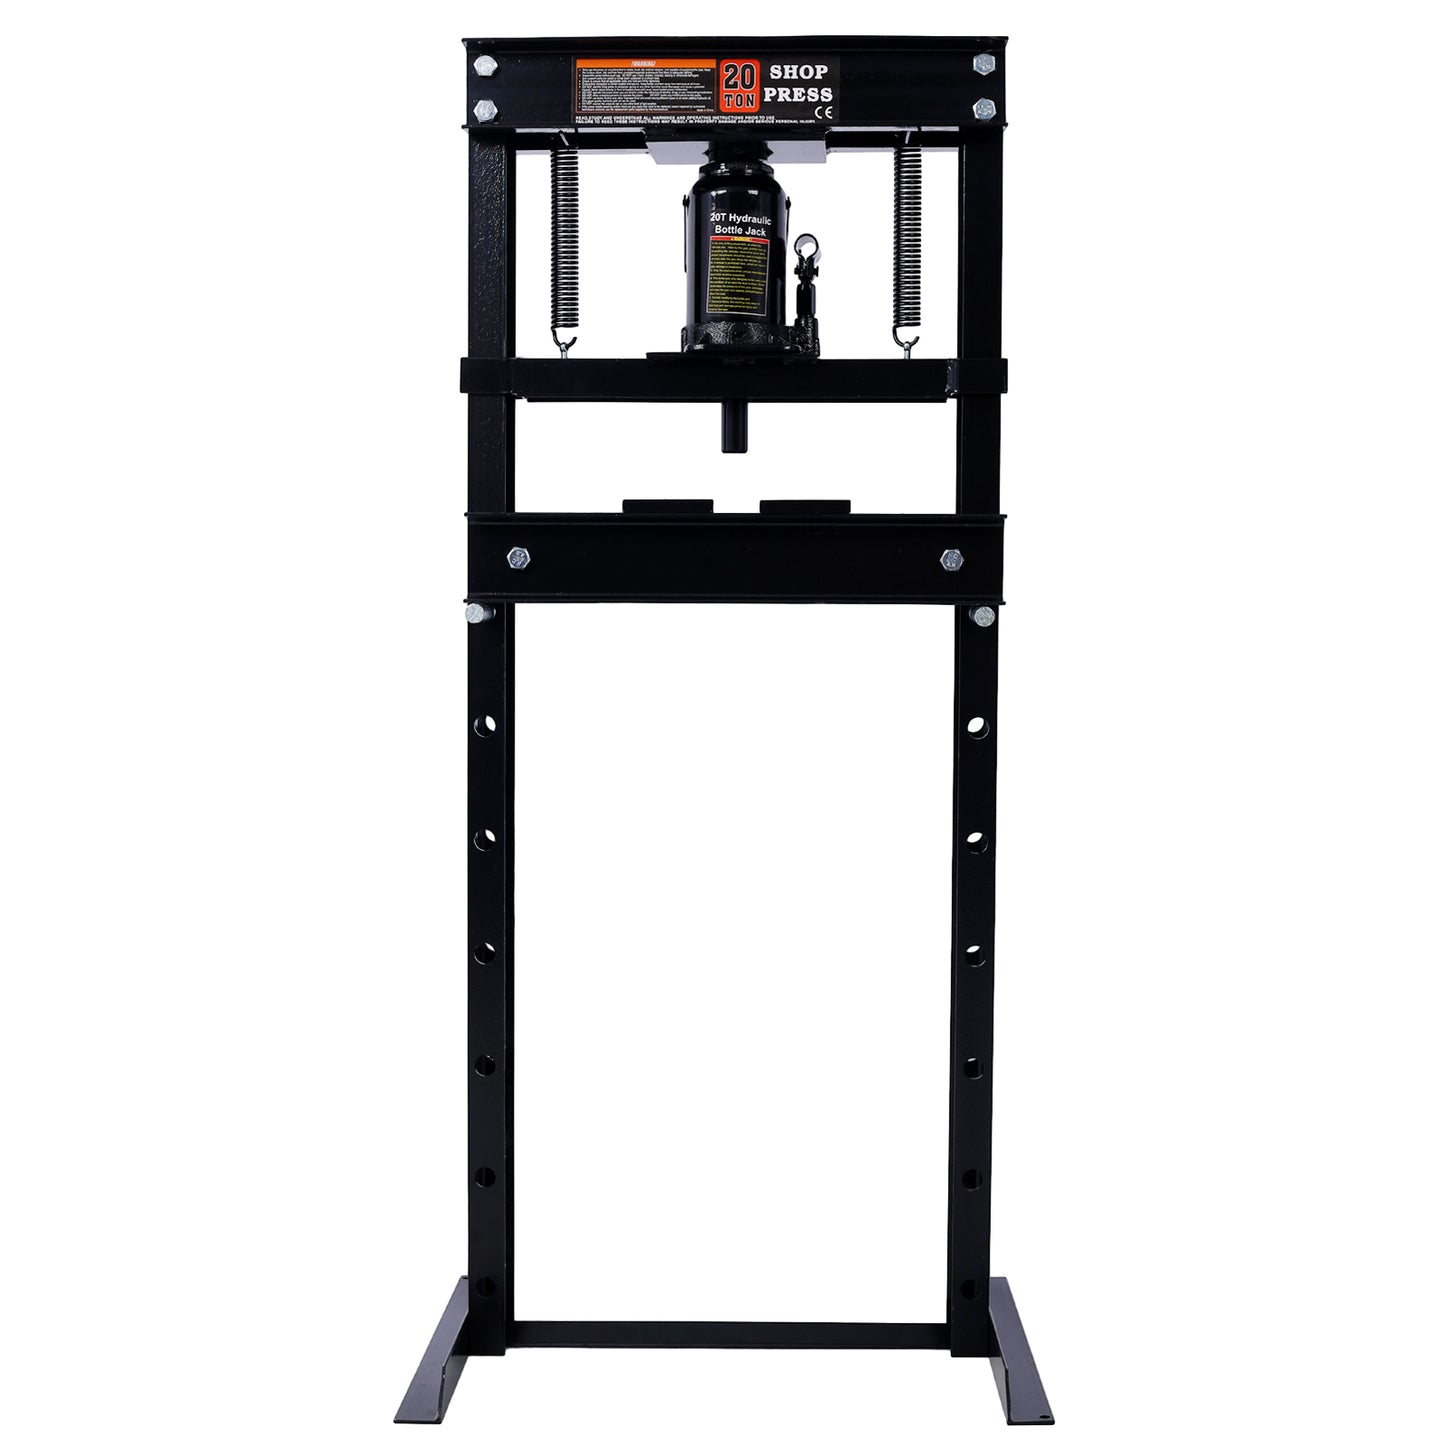 20 Ton Bottle Jack Shop Press, Bend, Straighten, or Press Parts, Install Bearings, U-Joints, Bushings, Ball Joints, and Pulleys,black